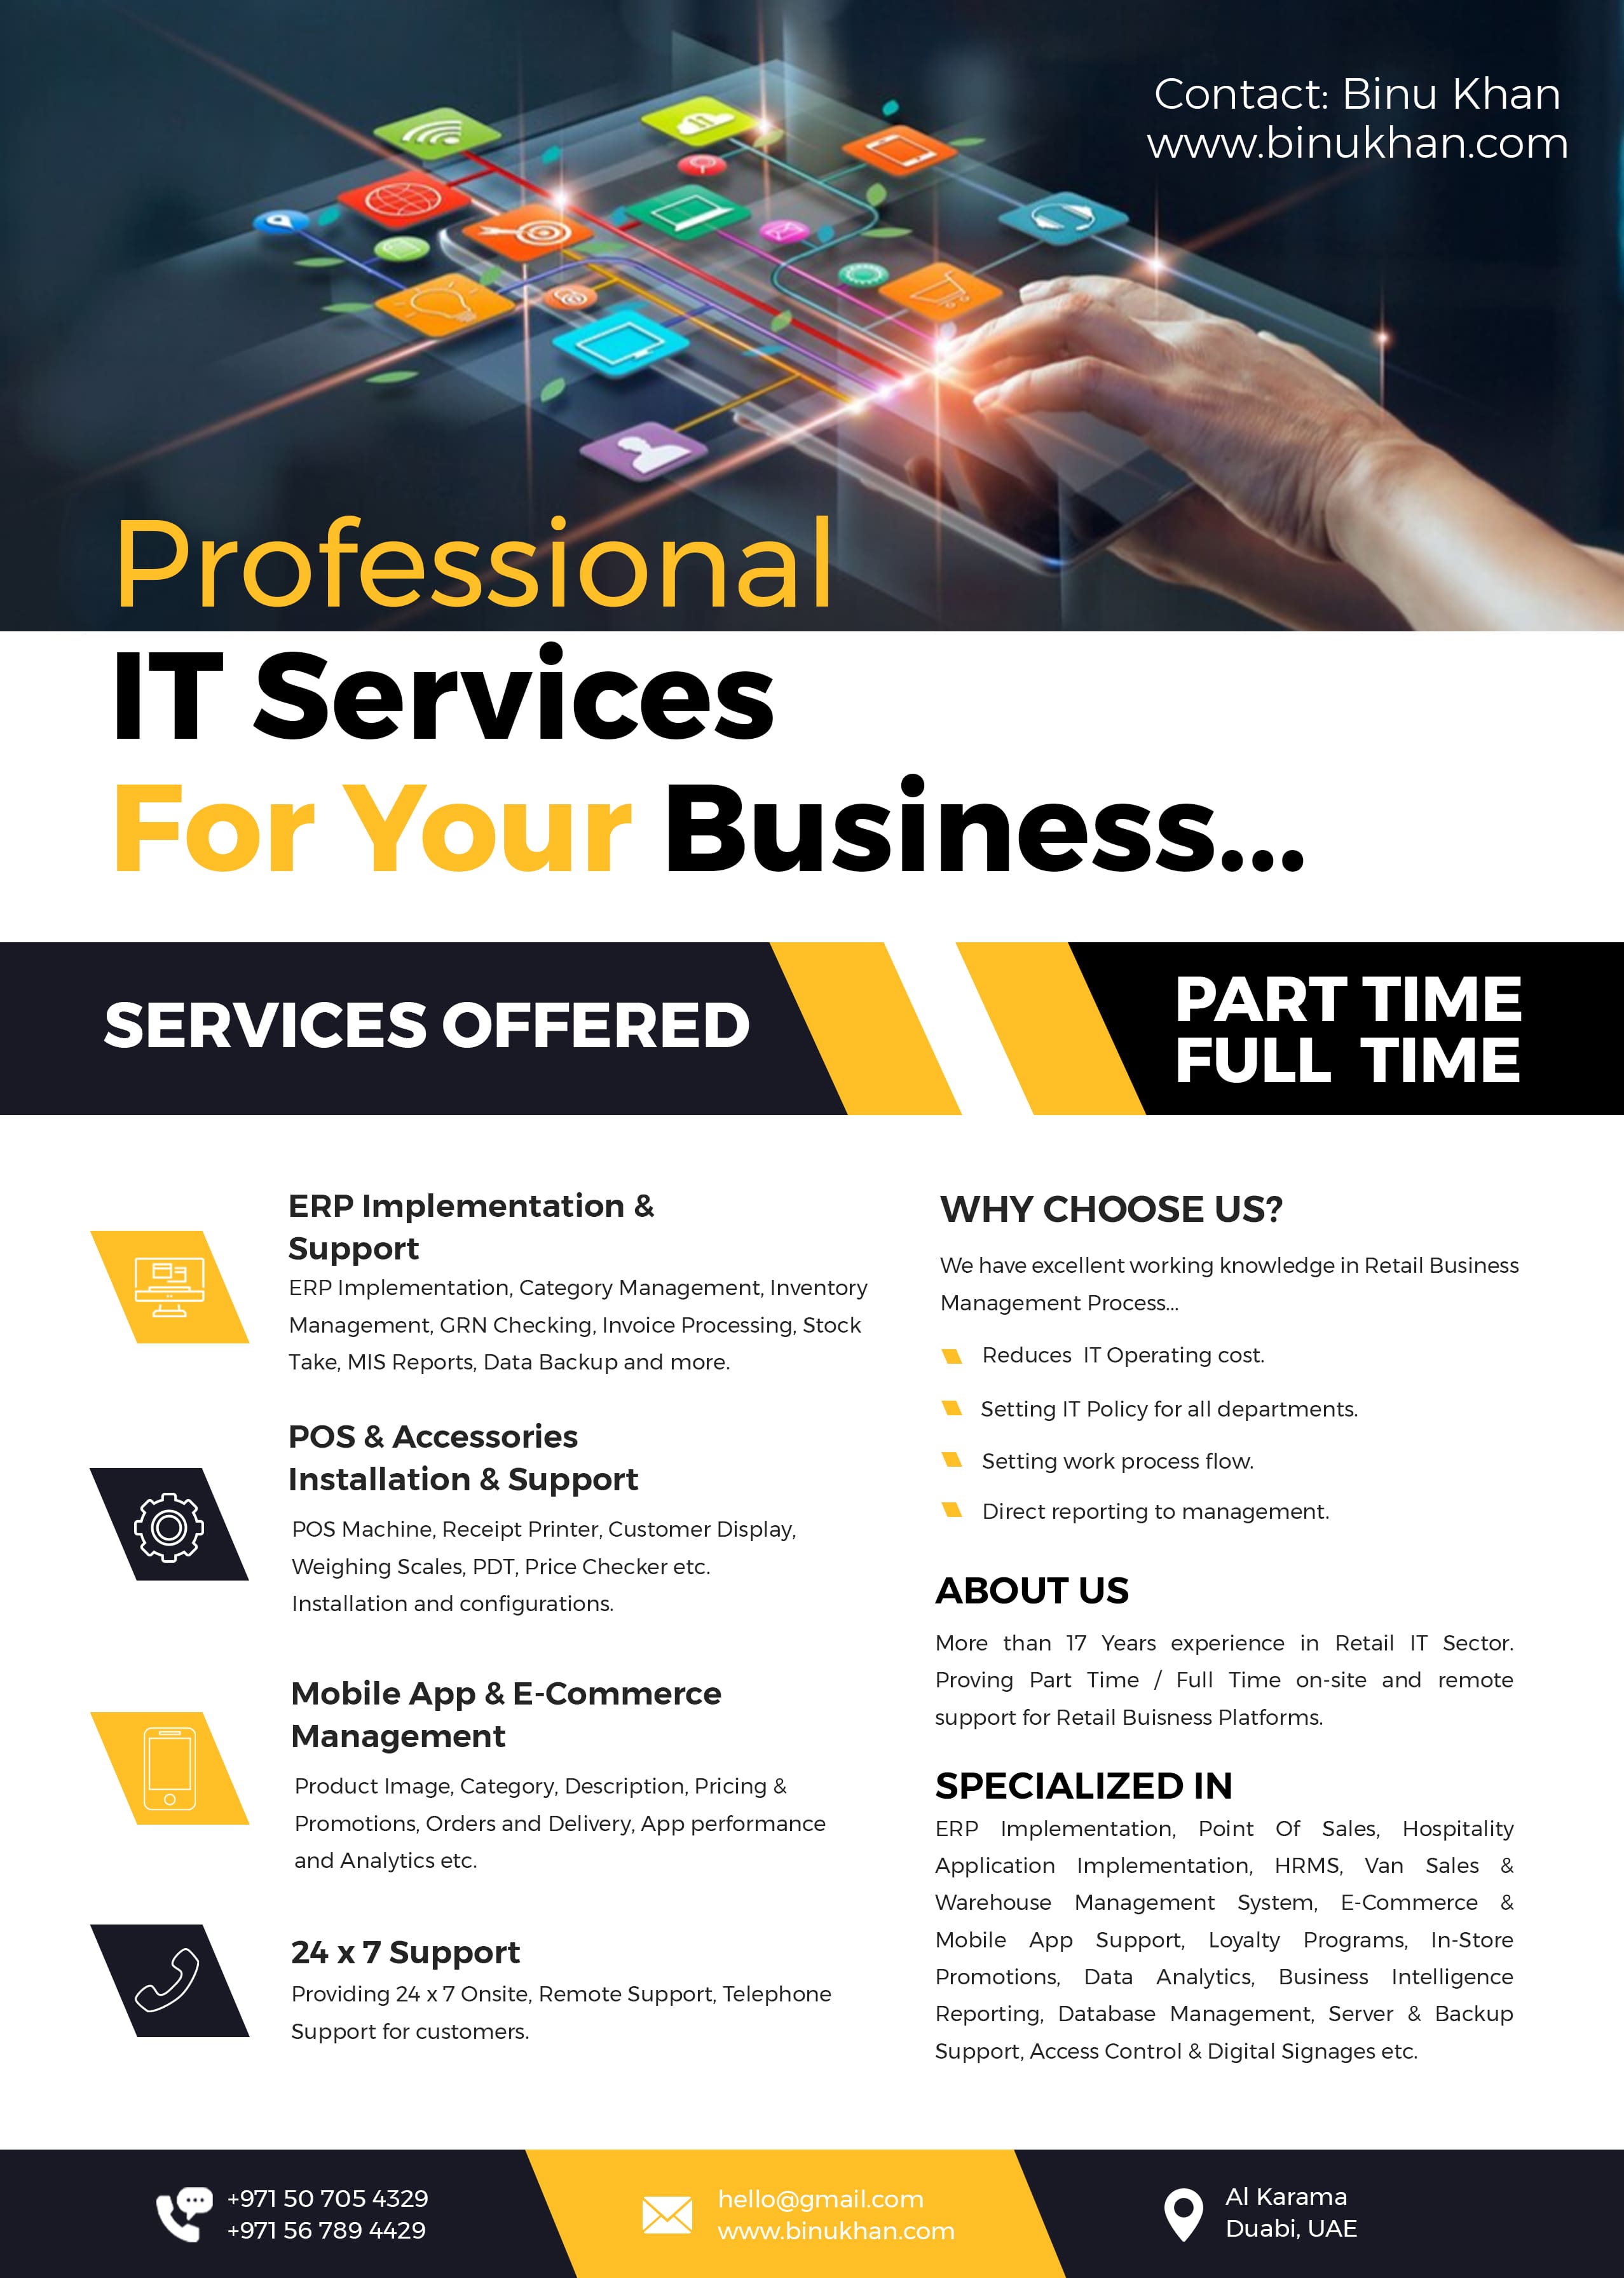 Contact: Binu Khan
www.binukhan.com

DS

Professional
IT Services
Business...

 

   

    

SU p11

SERVICES OFFERED FULL TIME

ERP Implementation &amp; WHY CHOOSE US?
Support

We have excellent working knowledge in Retail Business
ERP Implementation, Category Management, Inventory

Management Process...
Management, GRN Checking, Invoice Processing, Stock

Take, MIS Reports, Data Backup and more. Reduces IT Operating cost.

Setting IT Policy for all departments.
POS &amp; Accessories

Installation &amp; Support

. ) ) . Direct reporting to management.
@) POS Machine, Receipt Printer, Customer Display,

Weighing Scales, PDT, Price Checker etc.

Installation and configurations. ABOUT Us

More than 17 Years experience in Retail IT Sector.

Setting work process flow.

Proving Part Time / Full Time on-site and remote

Mobile App &amp; E-Commerce

support for Retail Buisness Platforms.

Management

Product Image, Category, Description, Pricing &amp; SPECIALIZED IN

Promotions, Orders and Delivery, App performance ERP Implementation, Point Of Sales, Hospitality

and Analytics etc. Application Implementation, HRMS, Van Sales &amp;
Warehouse Management System, E-Commerce &amp;
Mobile A S ort, Loyalty Programs, In-Store

24 x 7 Support Pp Supp yaly reg

Co . Promotions, Data Analytics, Business Intelligence
Providing 24 x 7 Onsite, Remote Support, Telephone

Reporting, Database Management, Server &amp; Backup

 

Support for customers.
Support, Access Control &amp; Digital Signages etc.

+971 56 789 4429

Ag +971 50 705 4329

Al Karama
Duabi, UAE